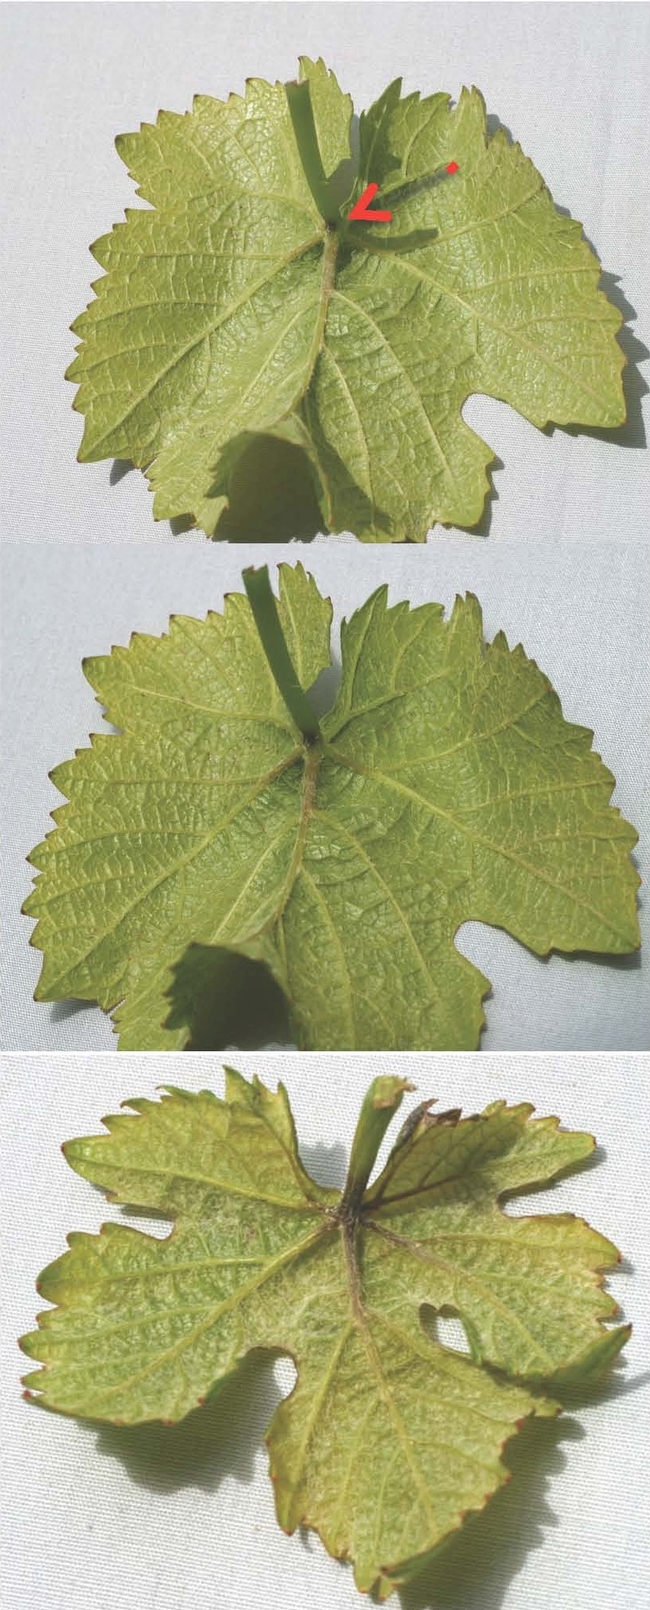 Note the progression of the dark necrotic tissue forming in the upper picture and increasing in the other picture in the apical end of the petiole and the base of the main leaf veins of these Pinot noir leaves.